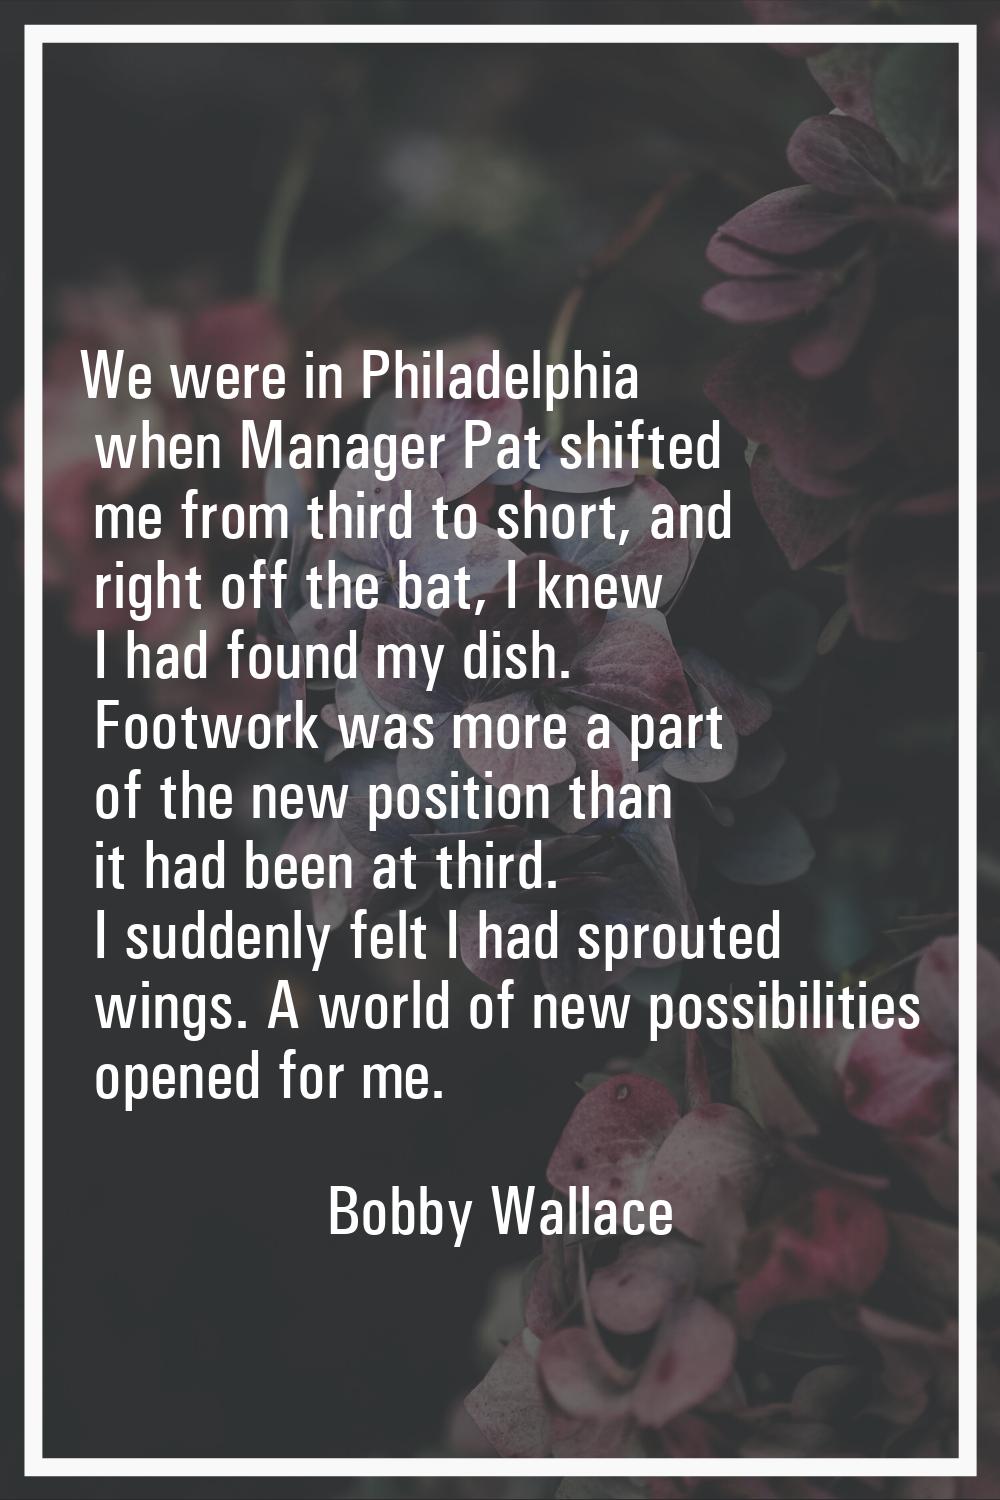 We were in Philadelphia when Manager Pat shifted me from third to short, and right off the bat, I k